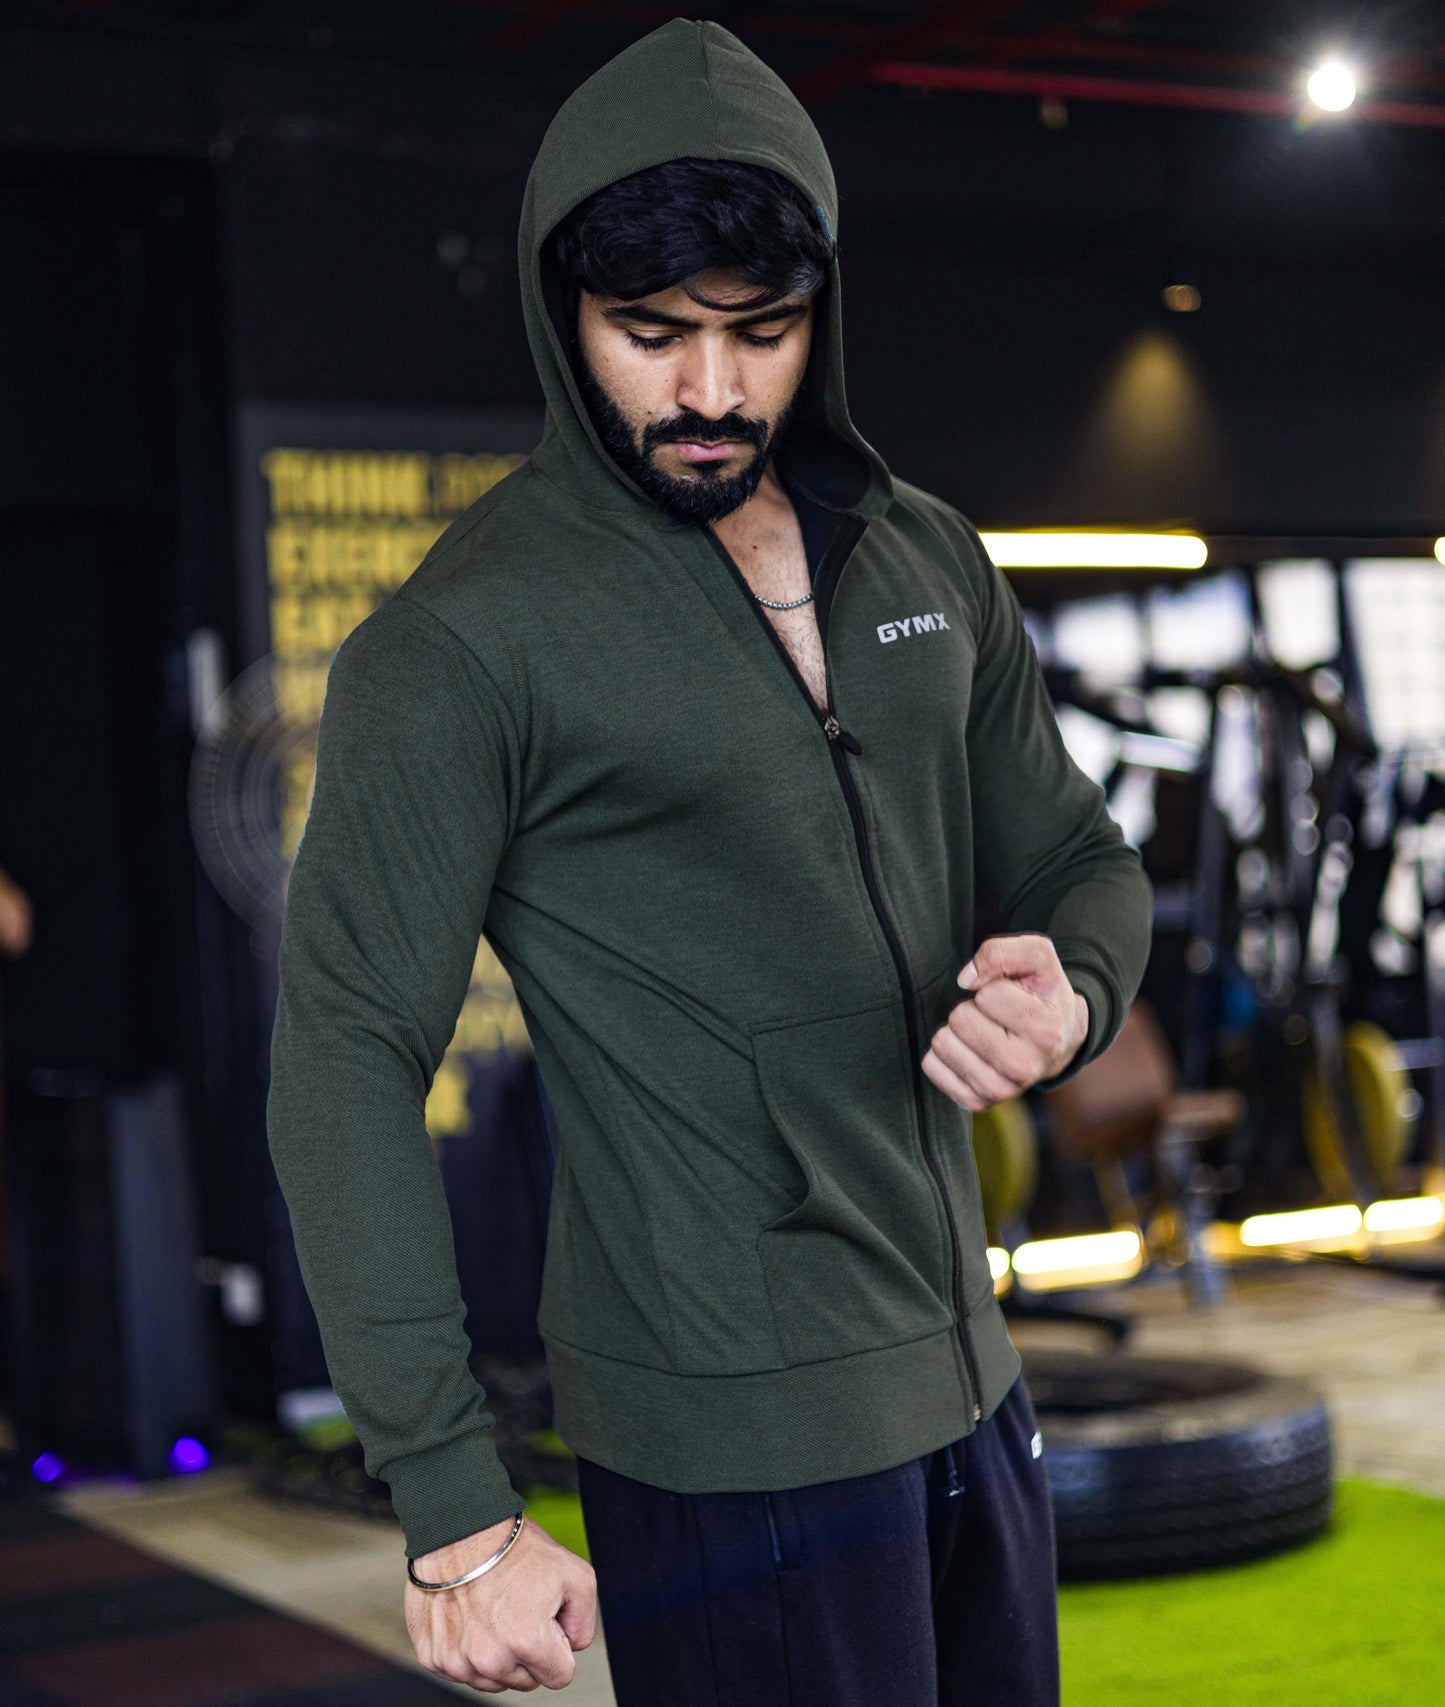 On A Mission: British Green GymX Hoodie - GymX